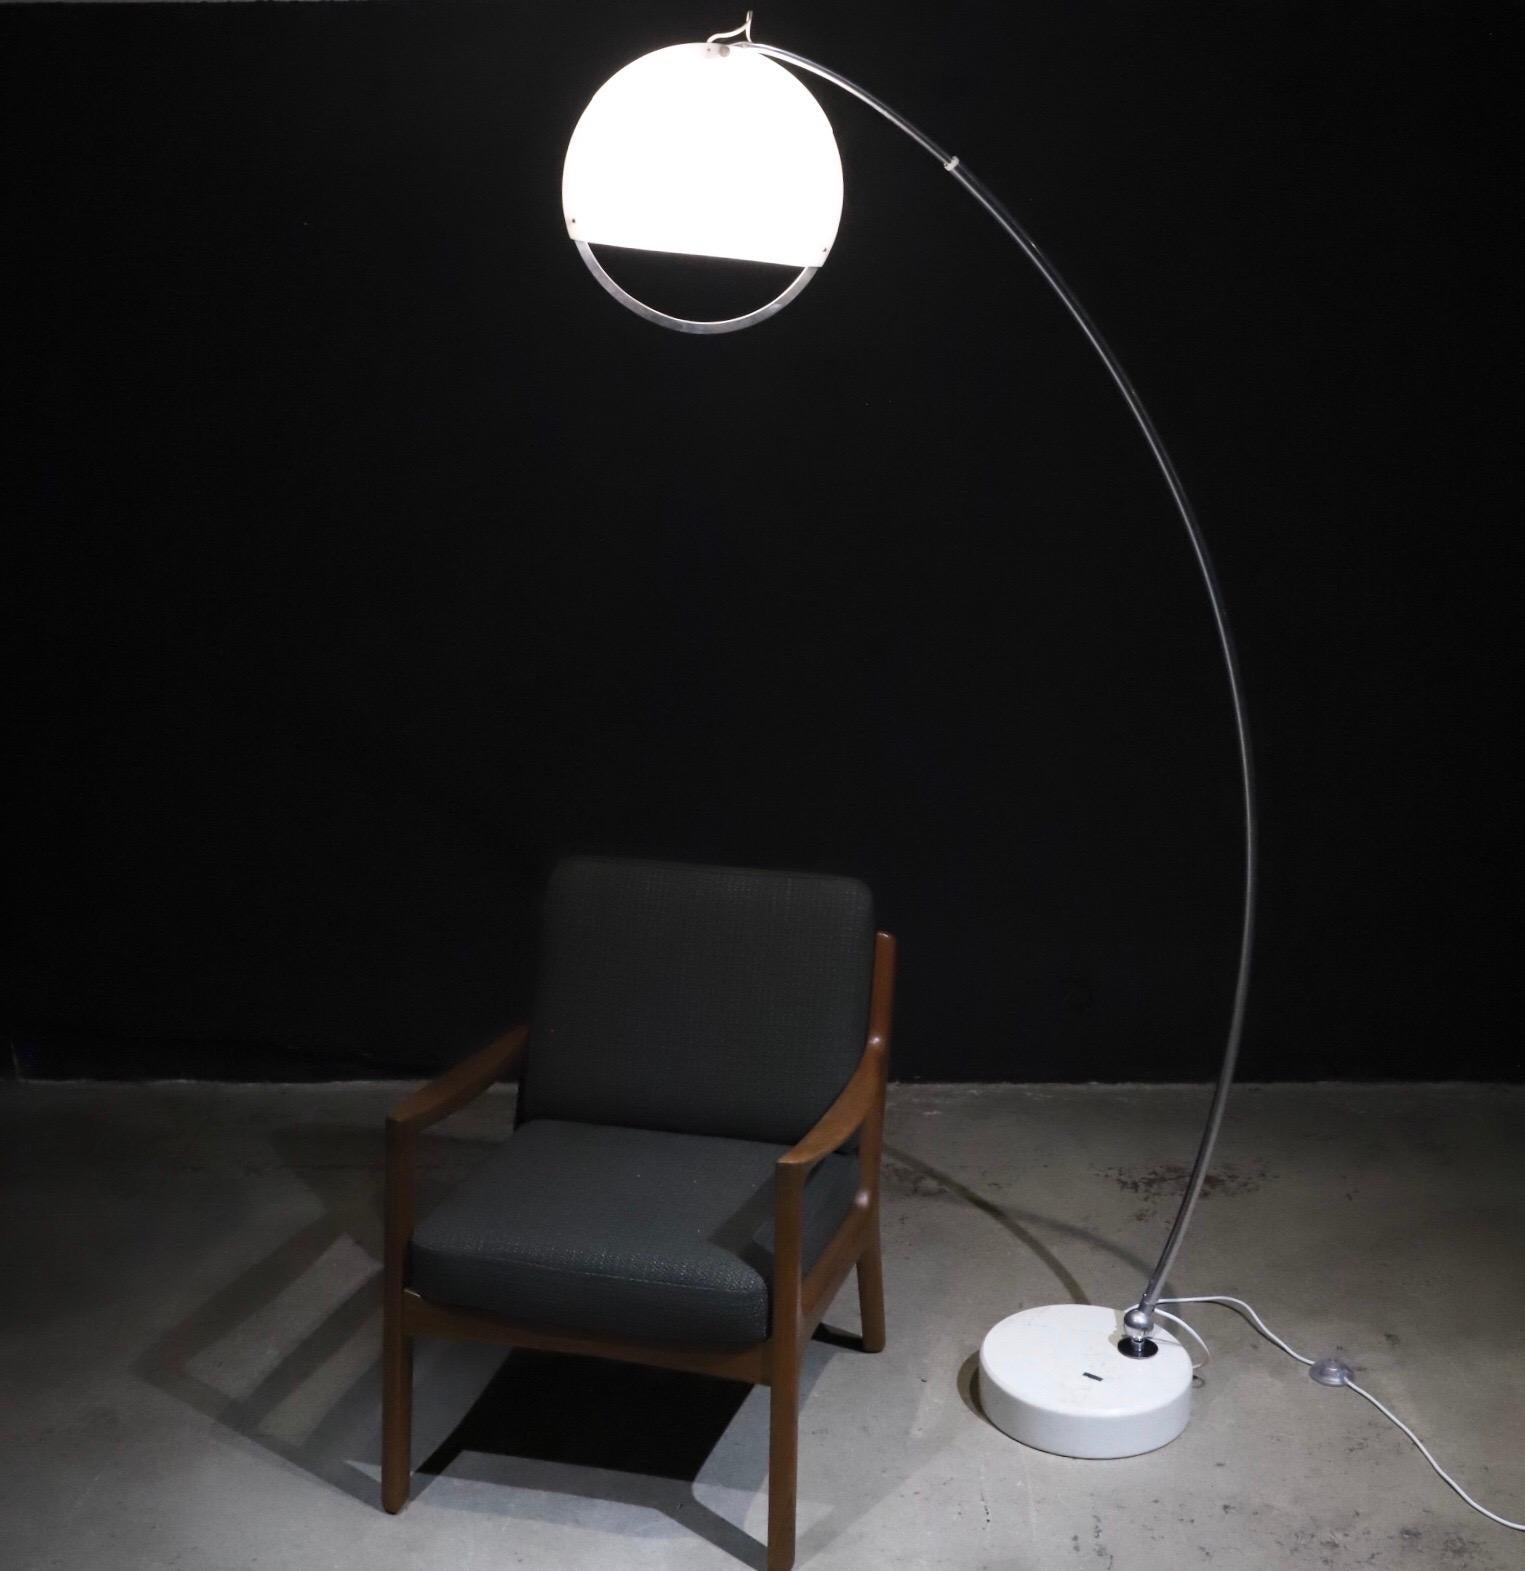 Adjustable. Simplistic oversized lamp for that single reading chair or extend the neck for that over the sofa statement lamp. Chrome body with marble base and molded two-piece globe with aluminum detail hoop. Pictured with Ole Wanscher armchair and